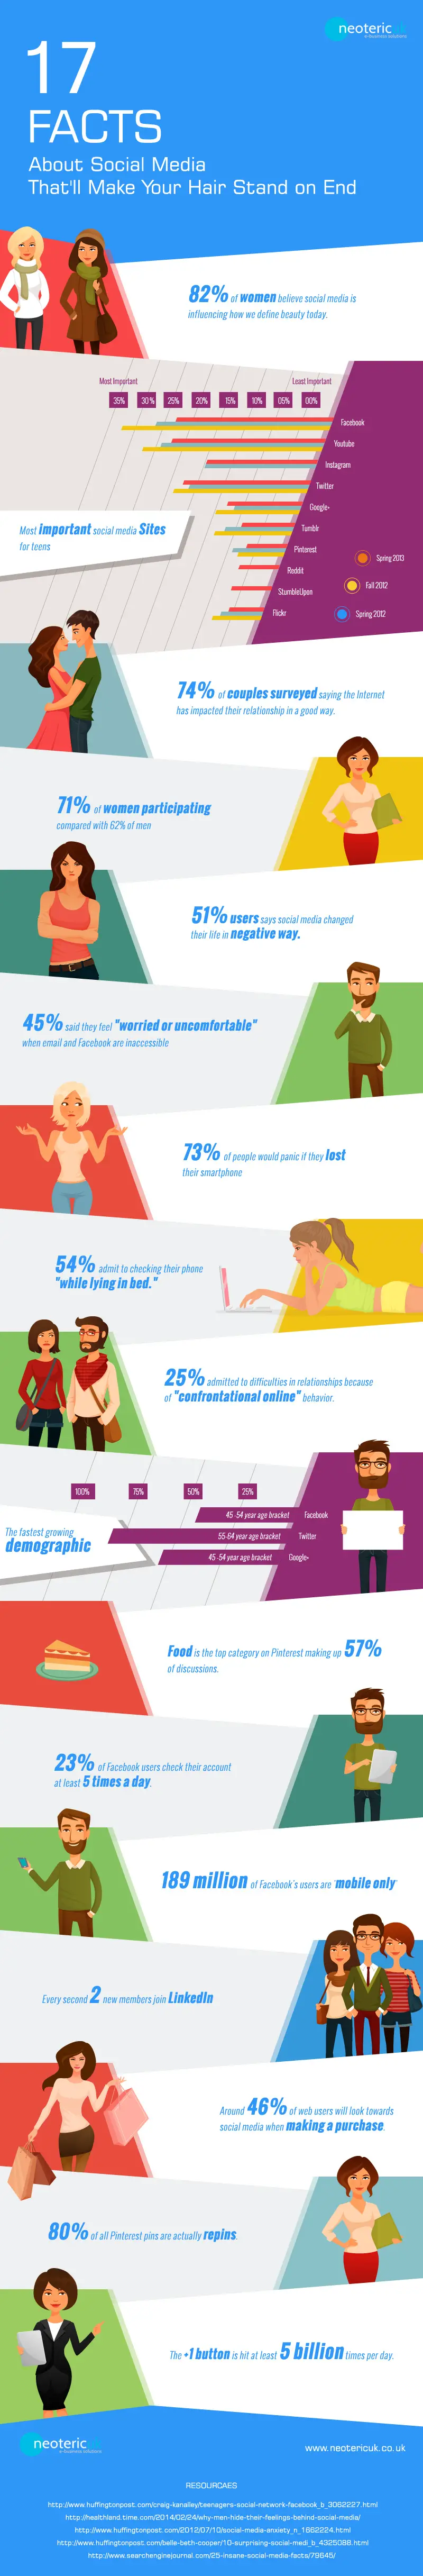 17-Facts-about-Social-Media-Thatll-Make-Your-Hair-Stand-on-End